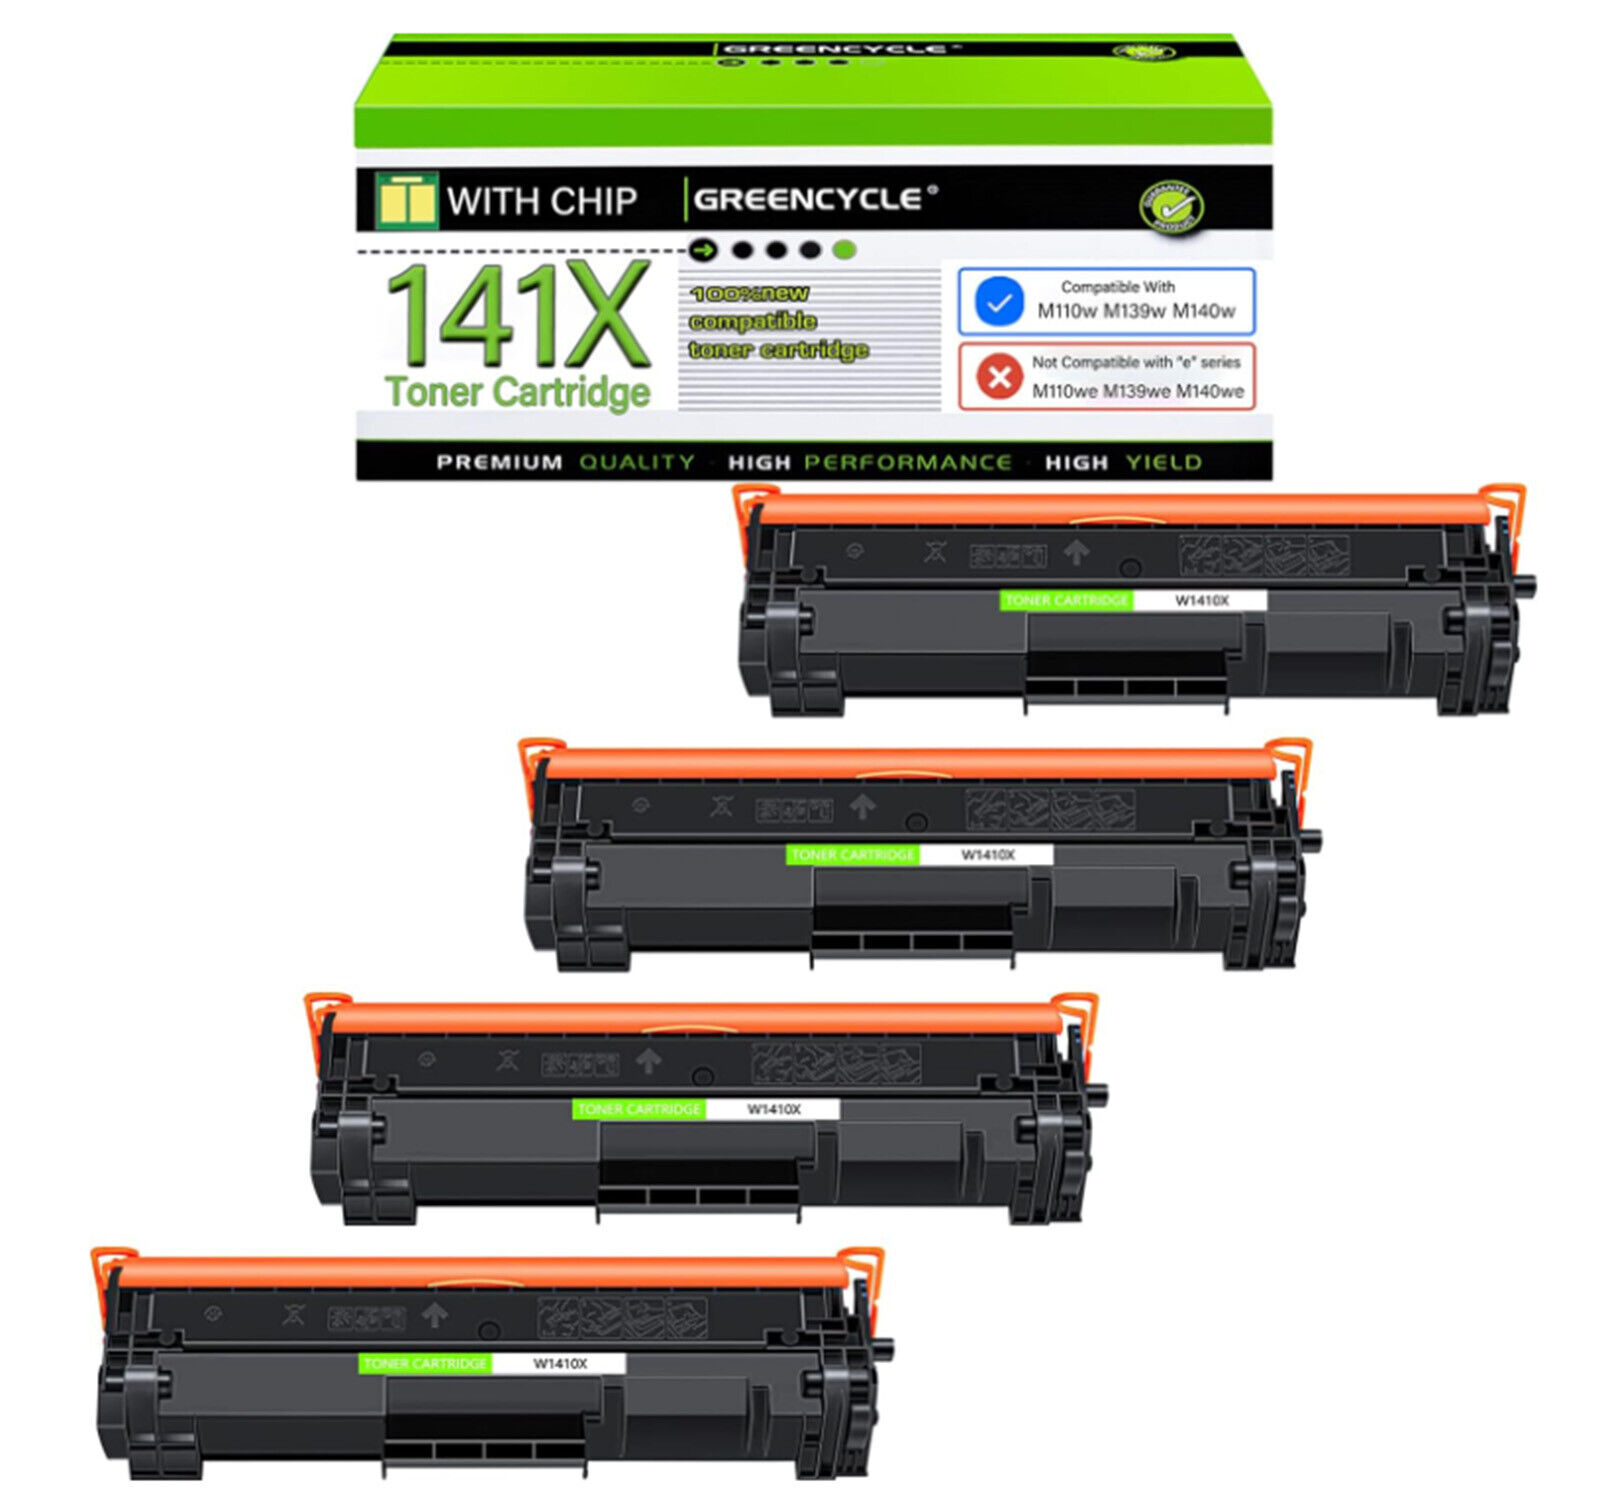 4PK 141X W1410X Compatible HP Toner Cartridges for M110w M139w M140w Not for *e